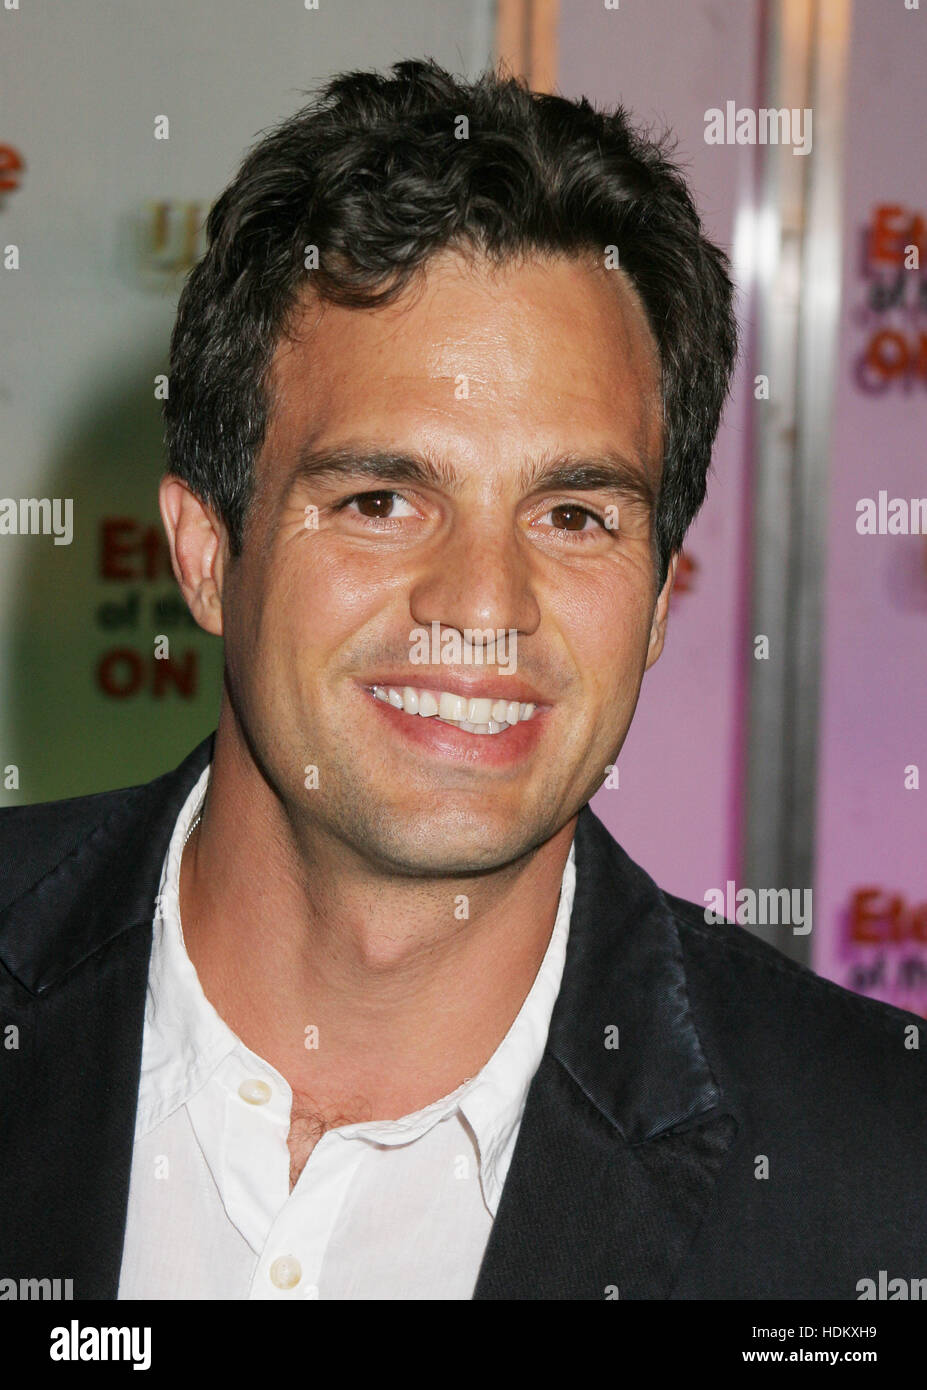 Actor Mark Ruffalo at the DVD launch party for the fillm, 'Eternal Sunshine of the Spotless Mind ' on September 23, 2004,  in Los Angeles, California. Photo credit: Francis Specker Stock Photo